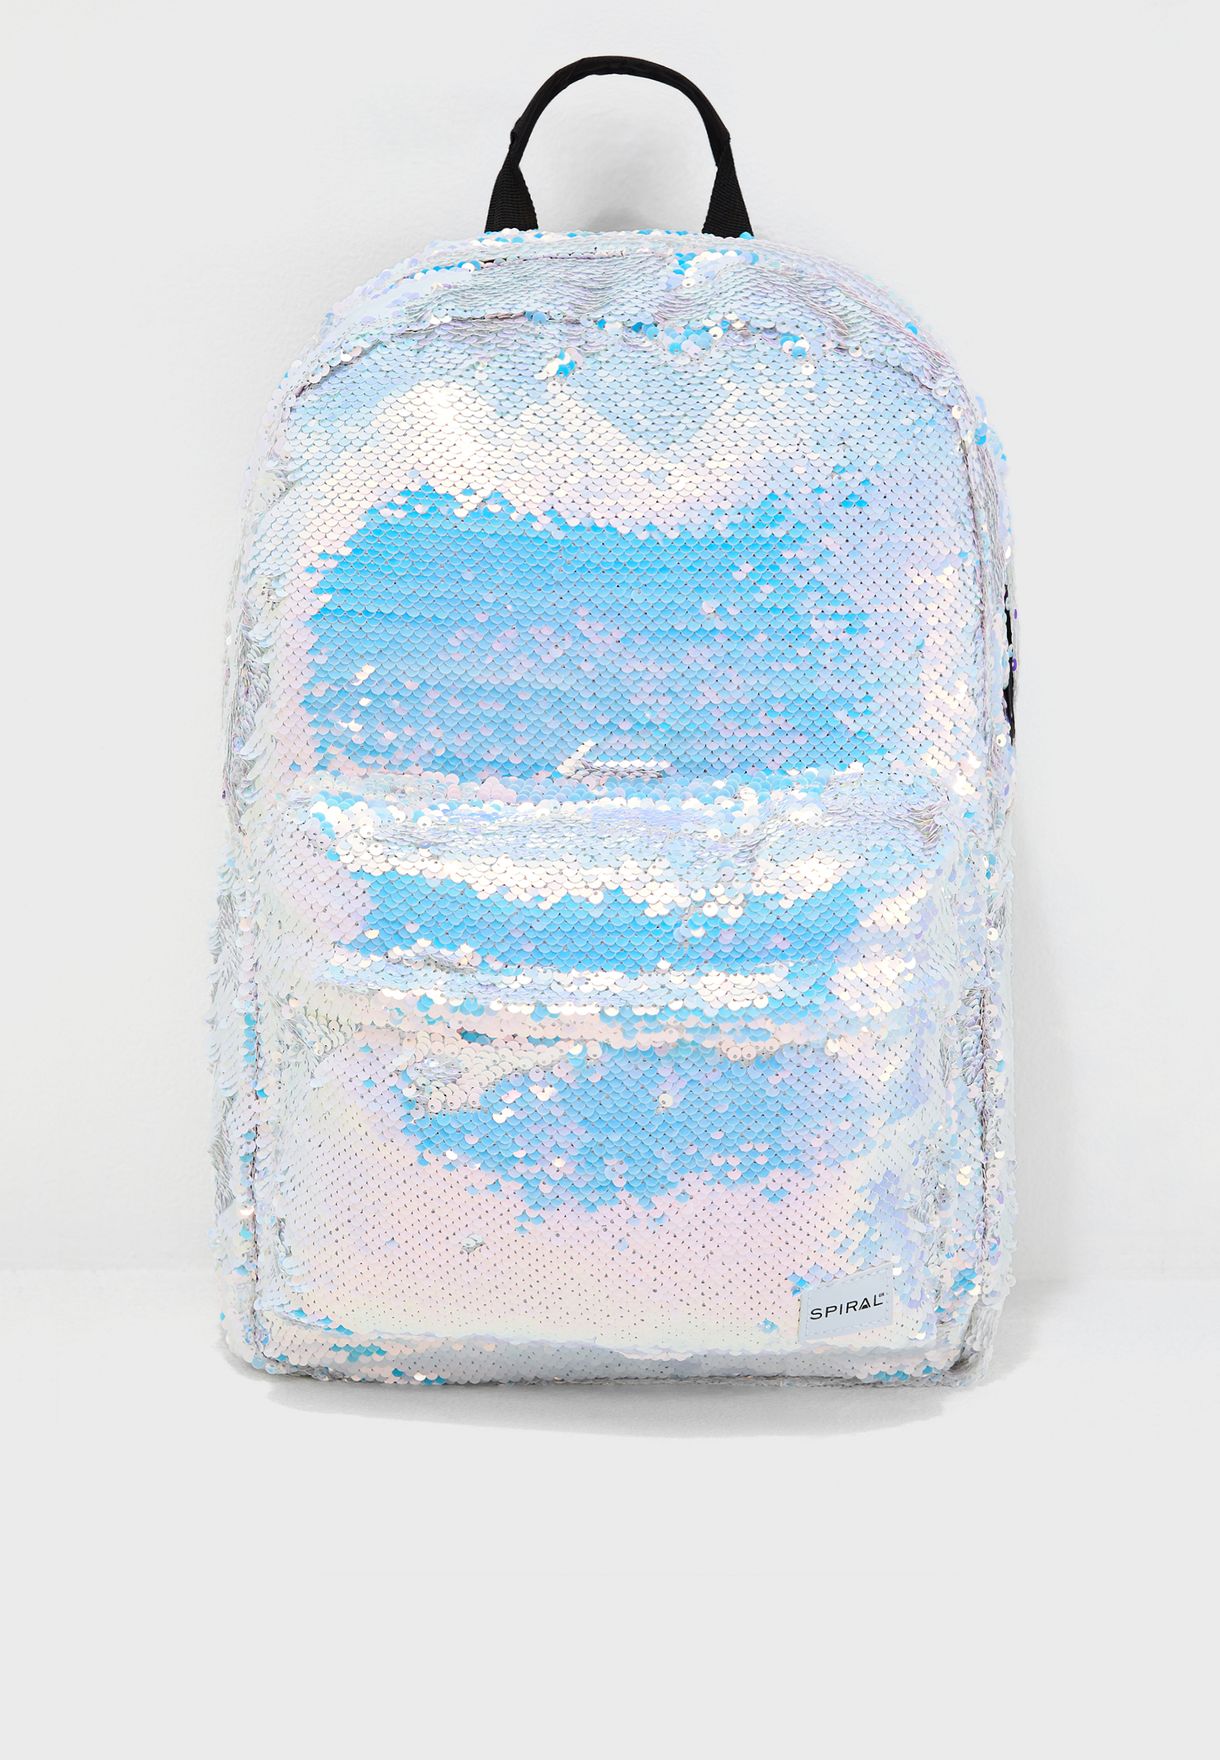 Special Edition Backpack